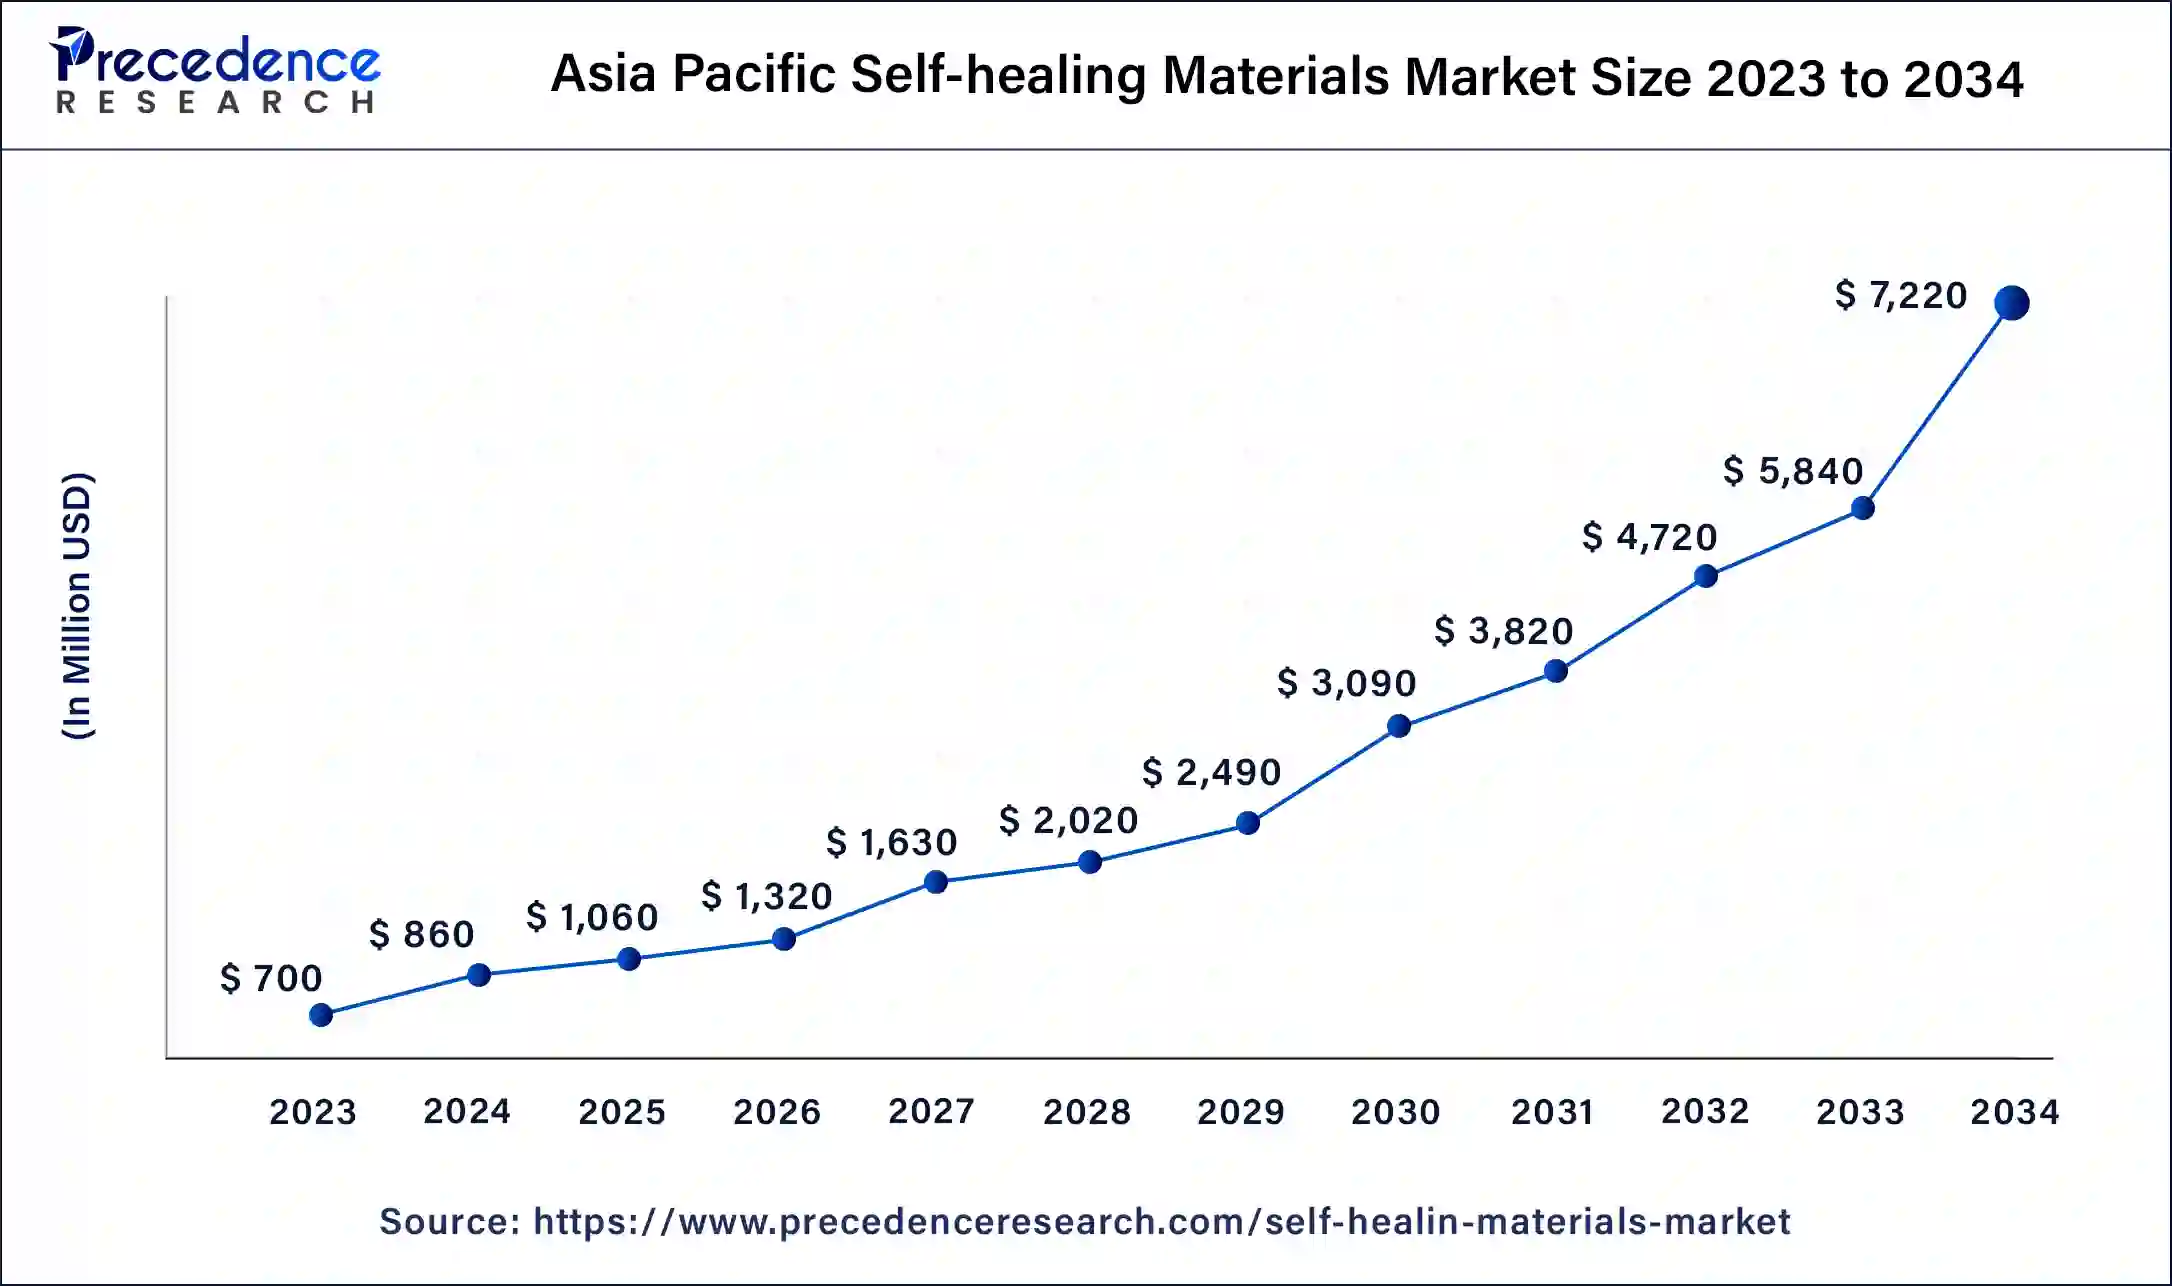 Asia Pacific Self-healing Materials Market Size 2024 to 2034